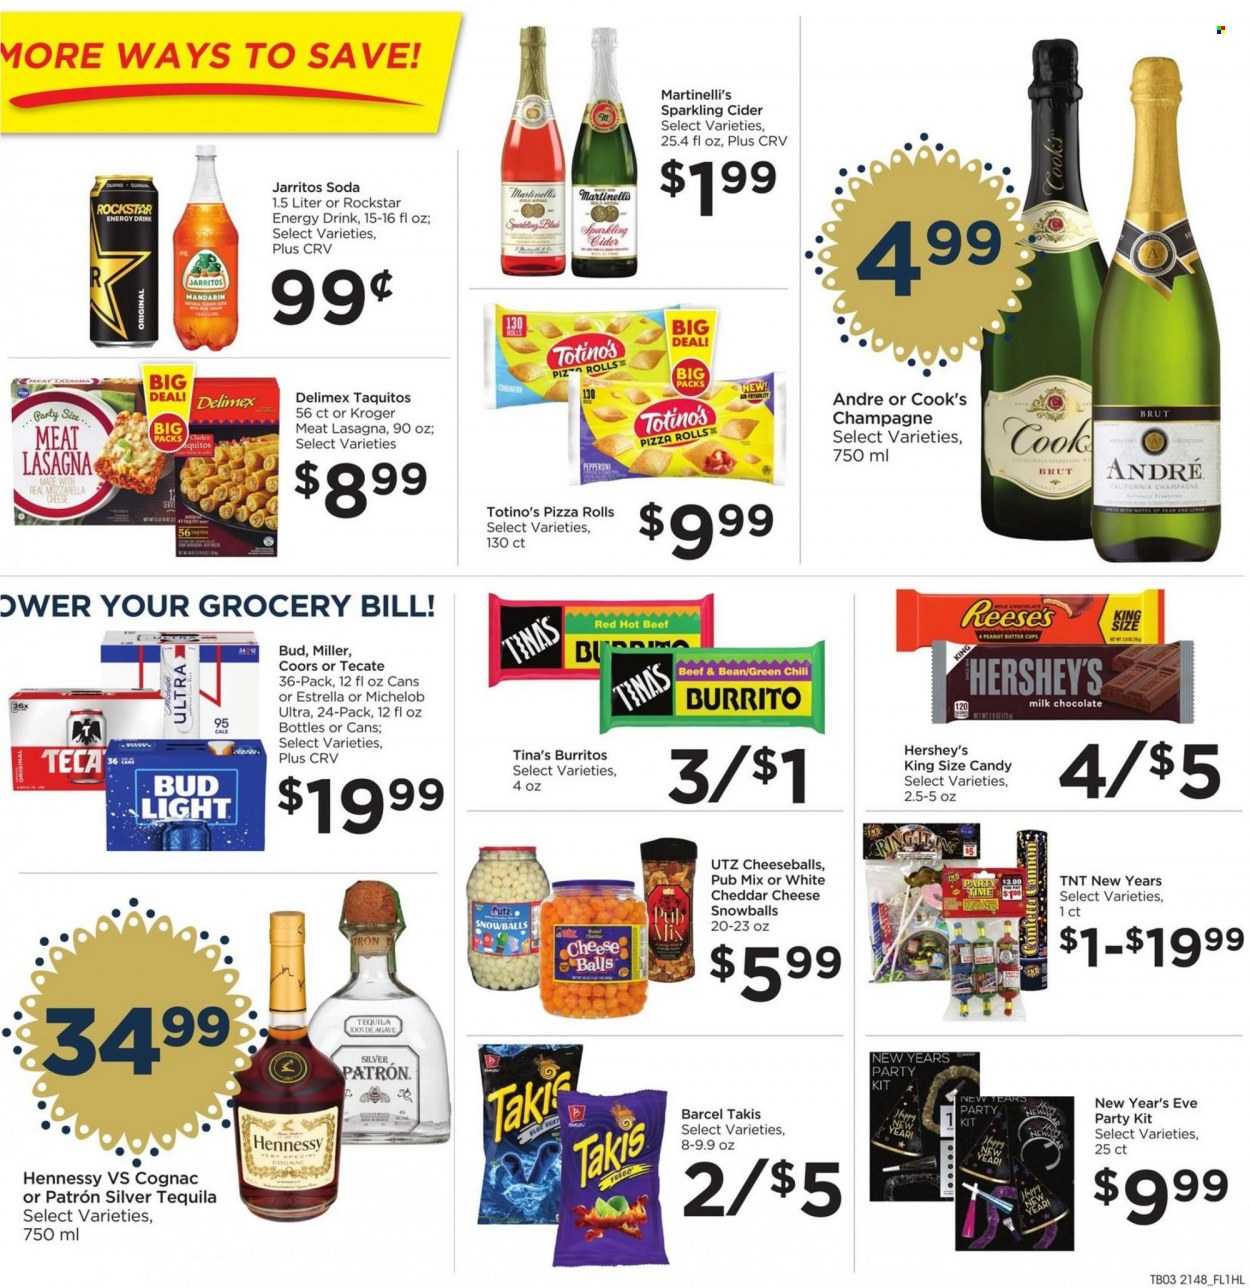 thumbnail - Food 4 Less Flyer - 12/29/2021 - 01/04/2022 - Sales products - pizza rolls, pizza, burrito, lasagna meal, taquitos, Cook's, pepperoni, cheddar, Reese's, Hershey's, milk chocolate, chocolate, peanut butter cups, energy drink, Rockstar, soda, sparkling cider, sparkling wine, champagne, cognac, tequila, Hennessy, cider, beer, Bud Light, Miller, Coors, Michelob. Page 3.